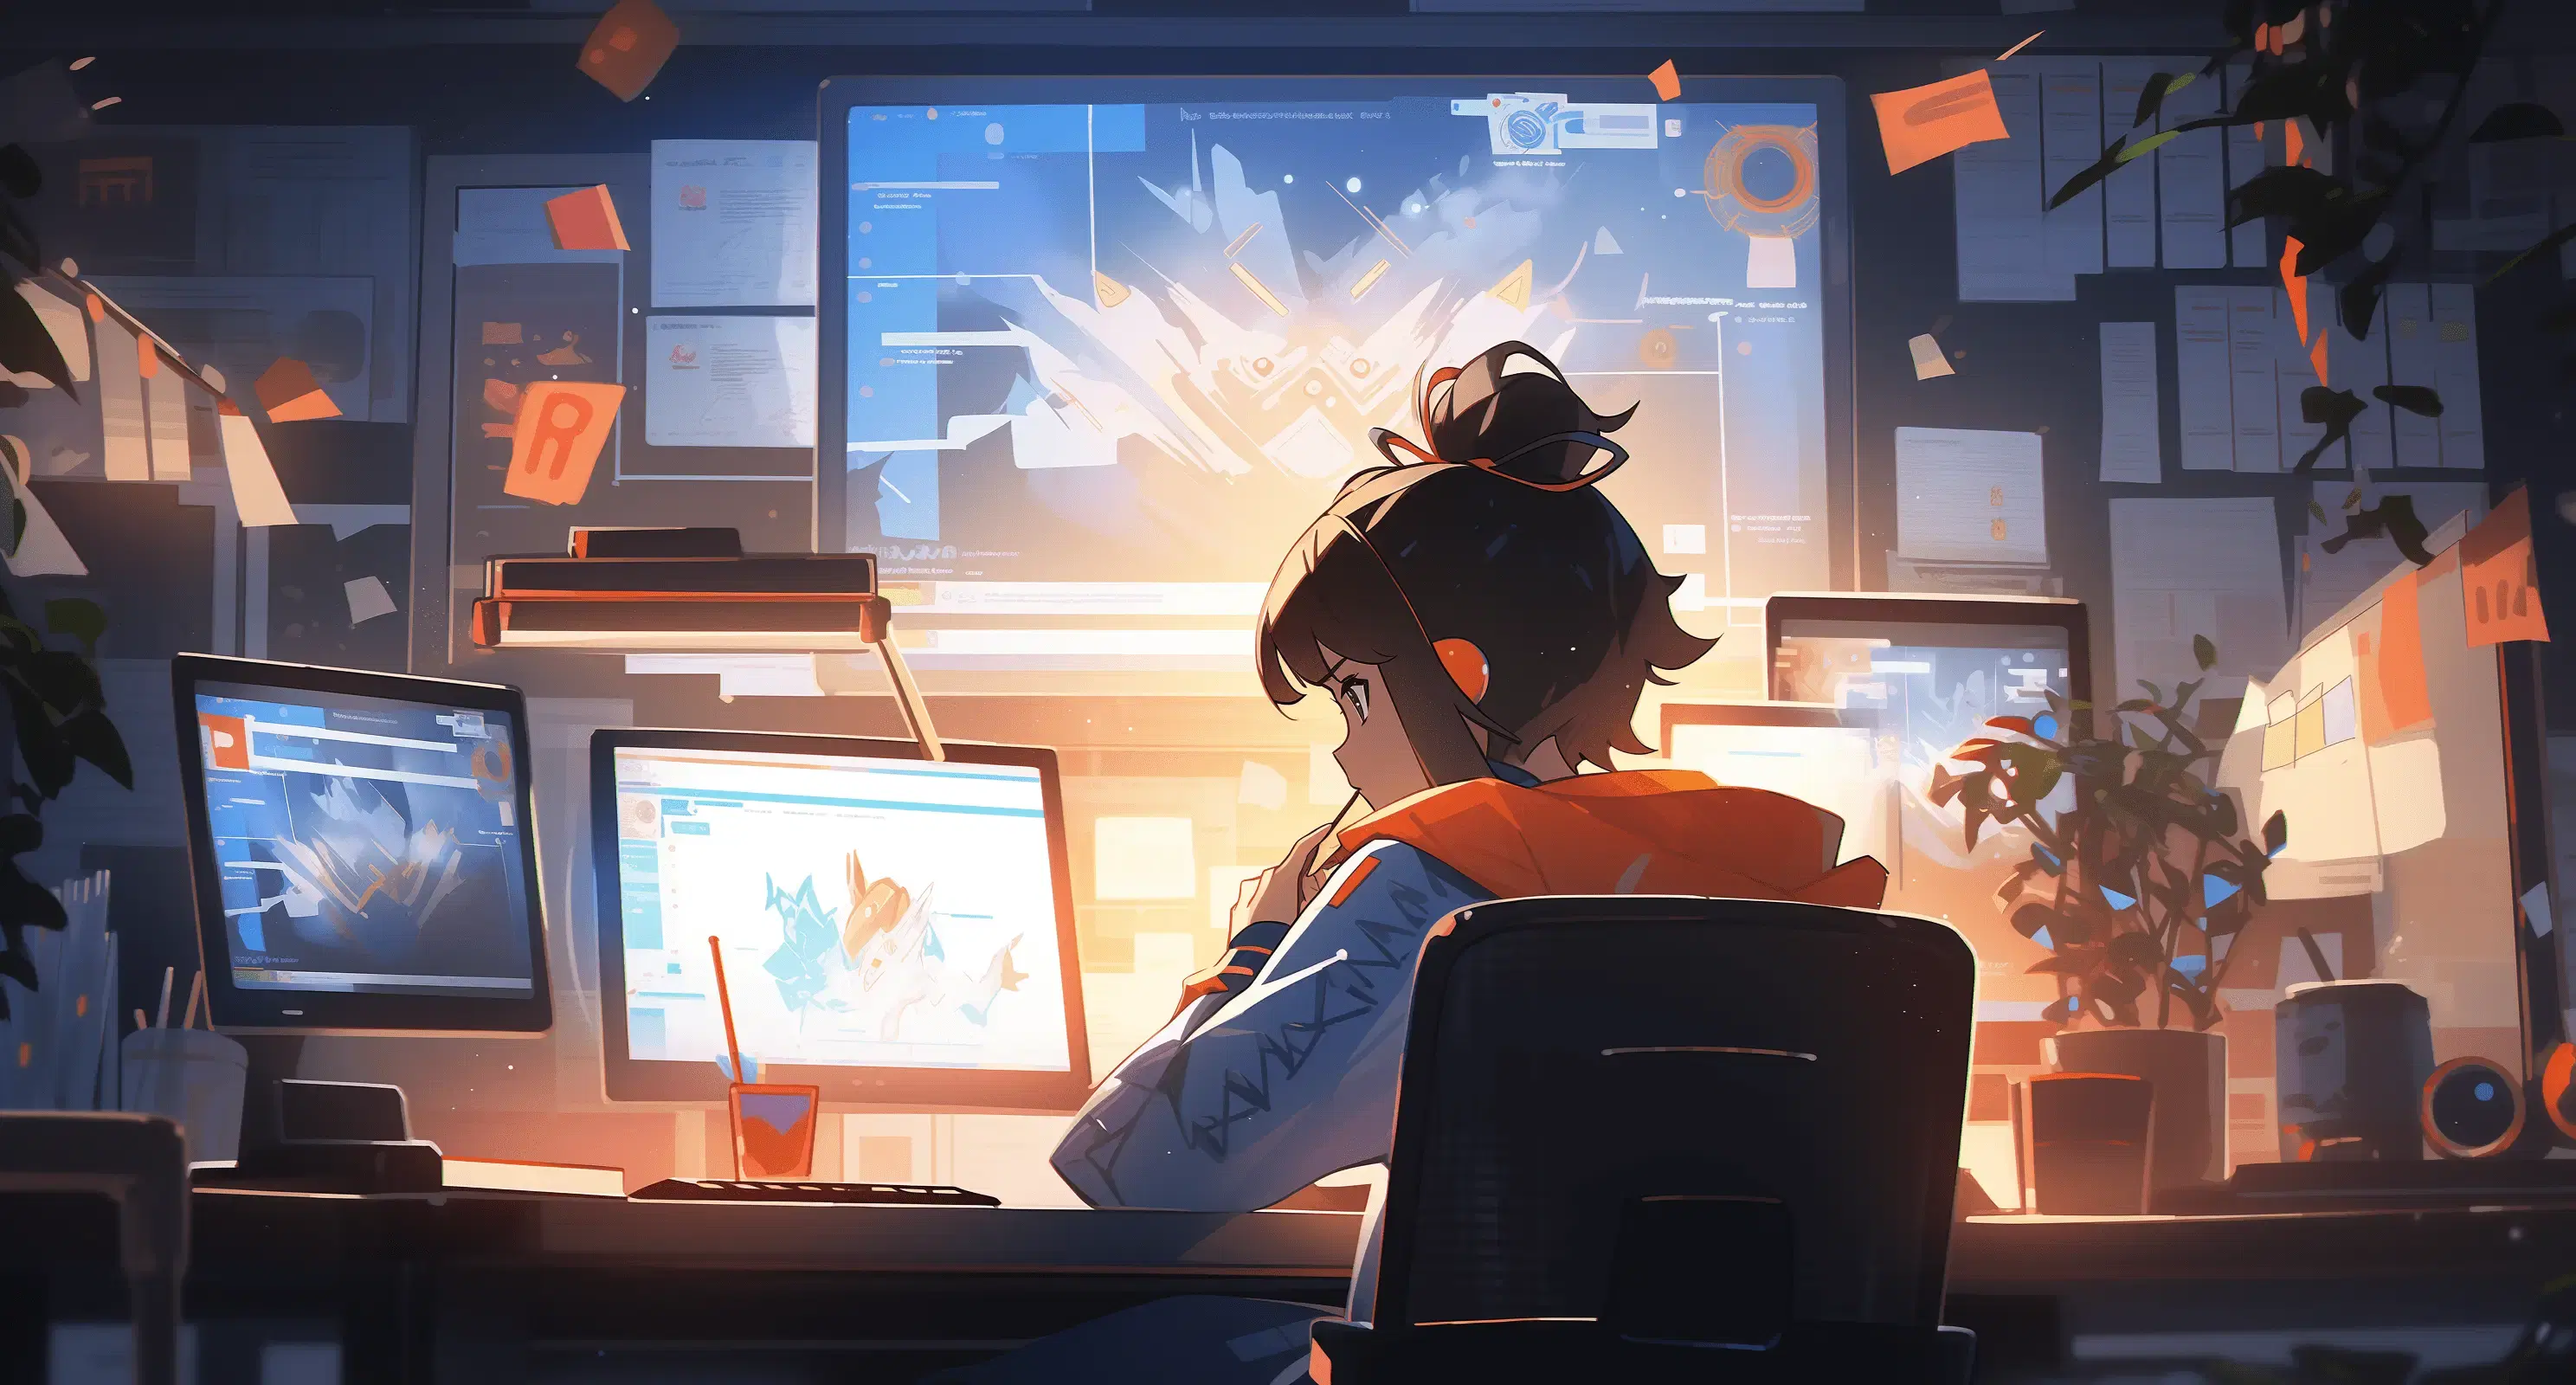 An anime illustration of a tech startup founder sitting at a desk with multiple computer screens, brainstorming